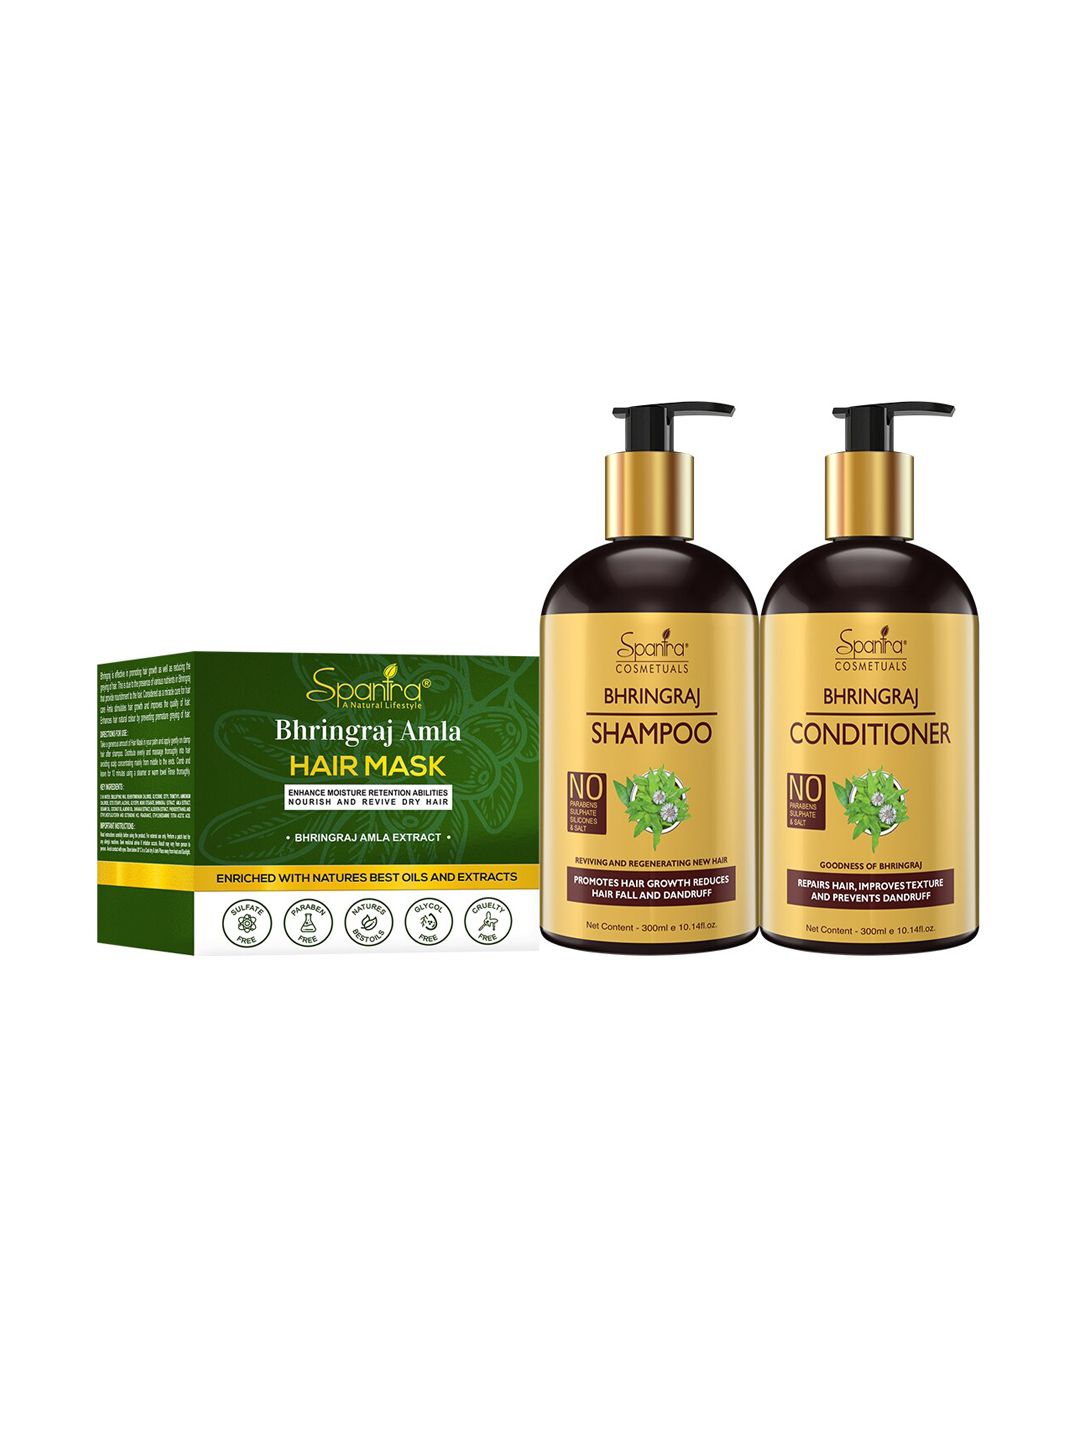 Spantra Bhringraj Shampoo & Conditioner with Hair Mask Price in India